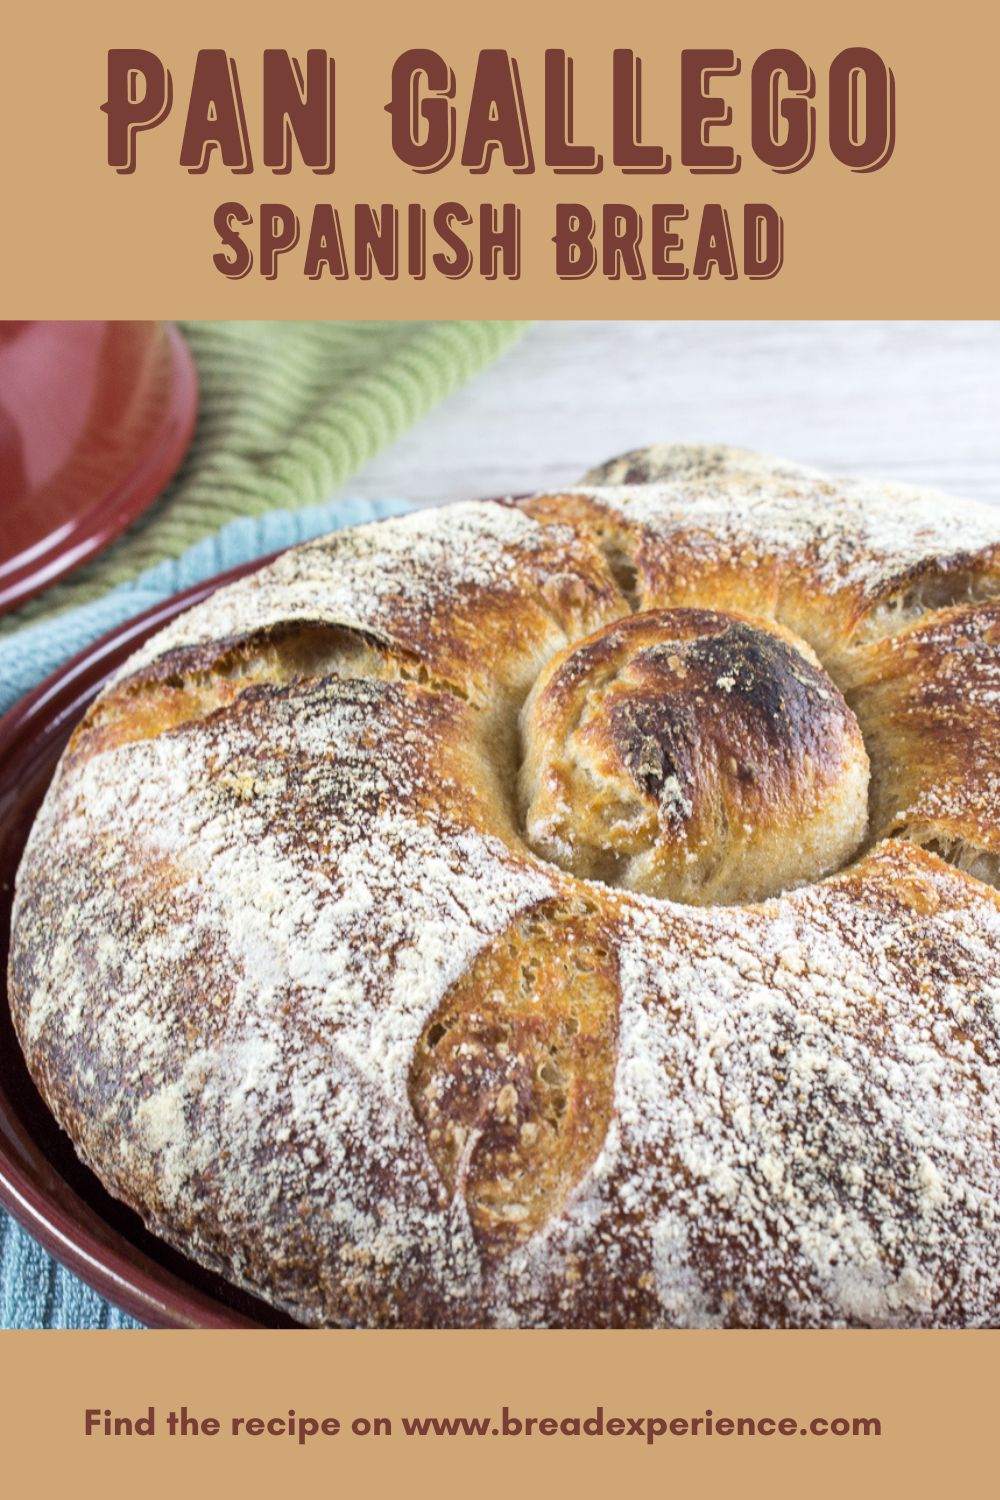 https://www.breadexperience.com/wp-content/uploads/Pan-Gallego-Bread-of-Galicia.png